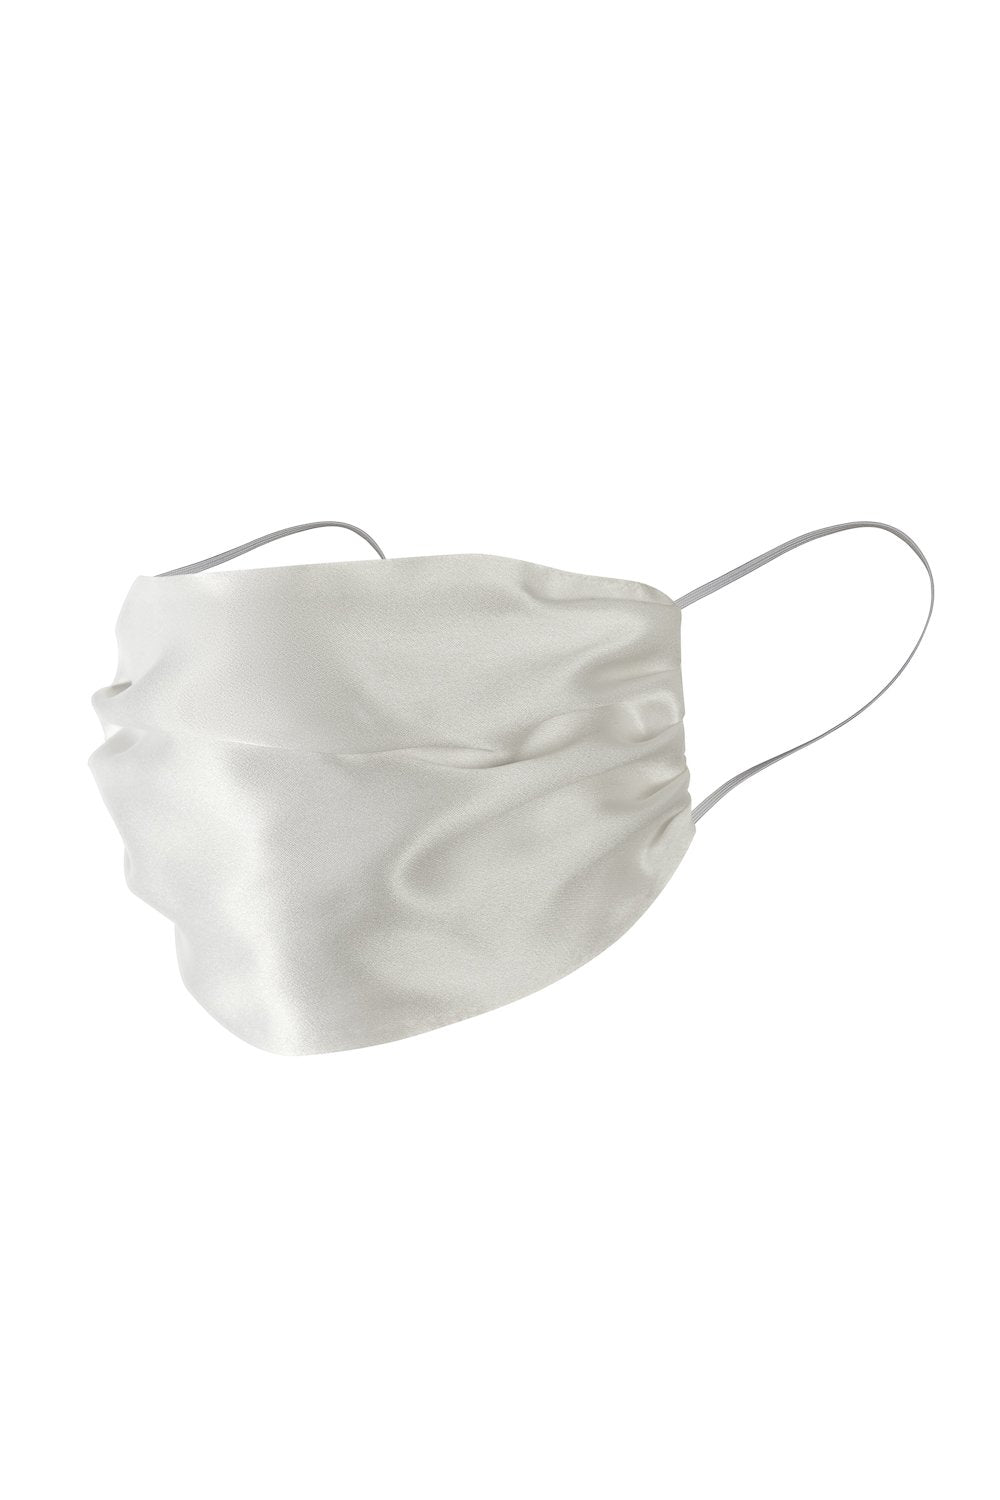 Silk Face Mask in Ivory For Him - silk&jam